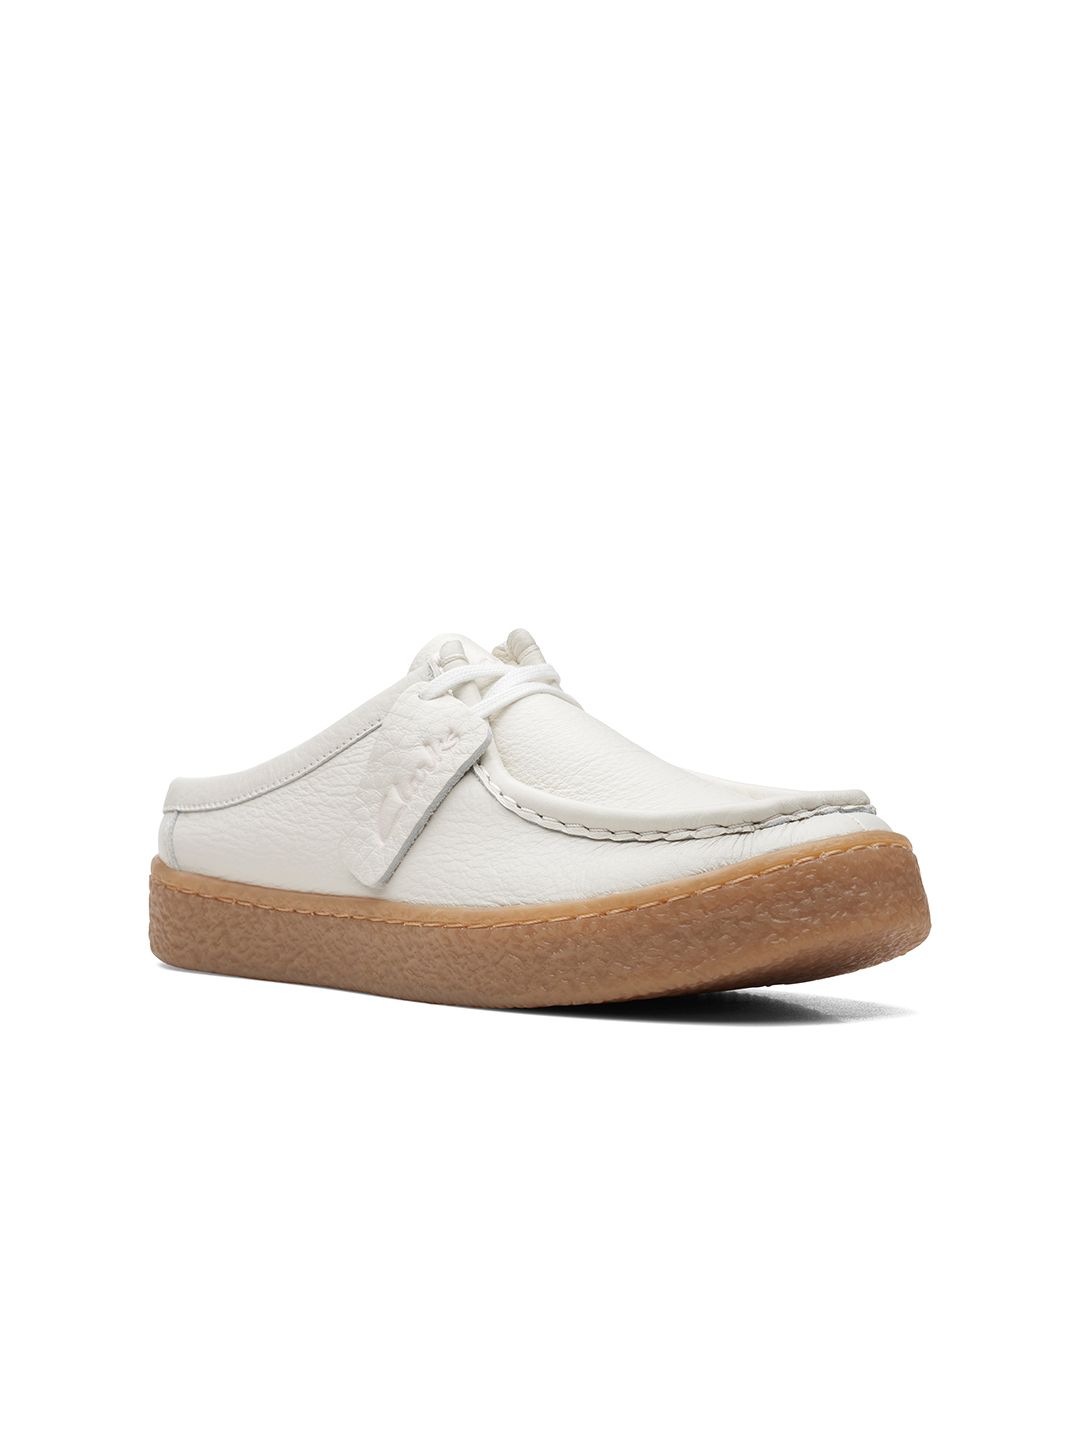 Clarks Women White Leather Mule Price in India